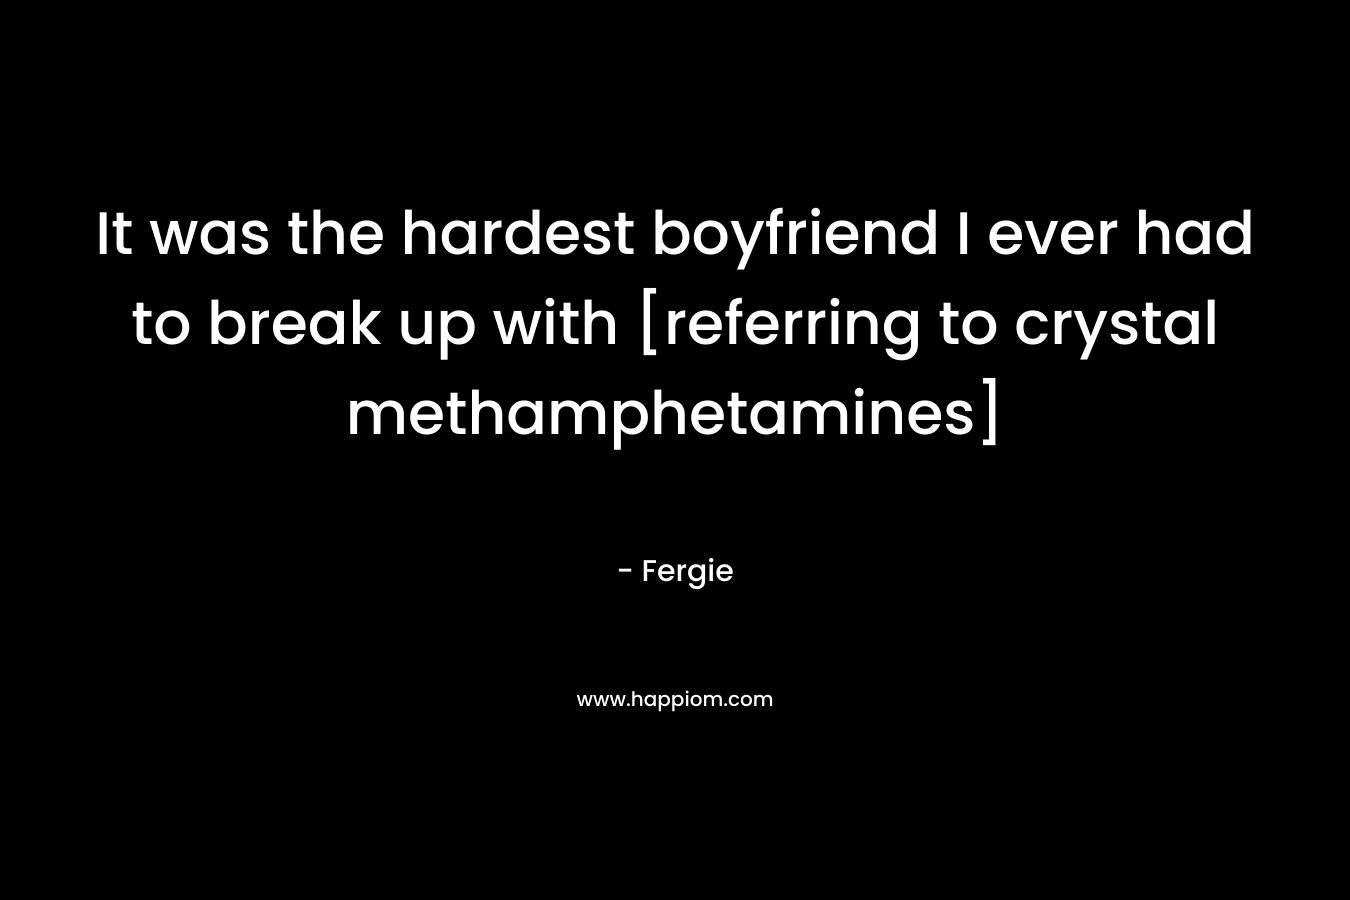 It was the hardest boyfriend I ever had to break up with [referring to crystal methamphetamines] – Fergie